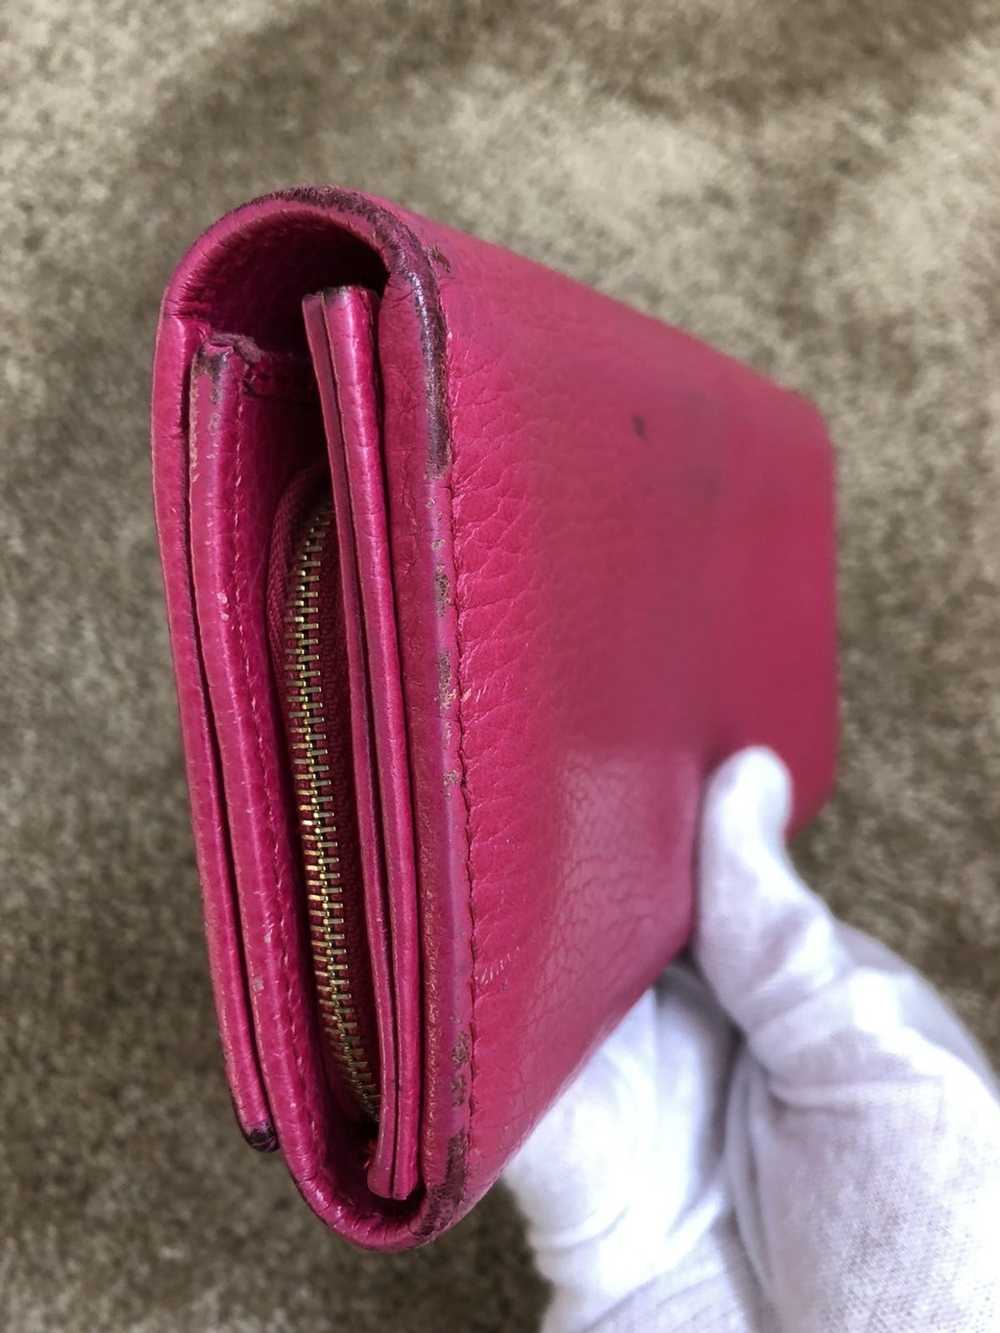 Gucci Gucci pink leather long wallet - image 5